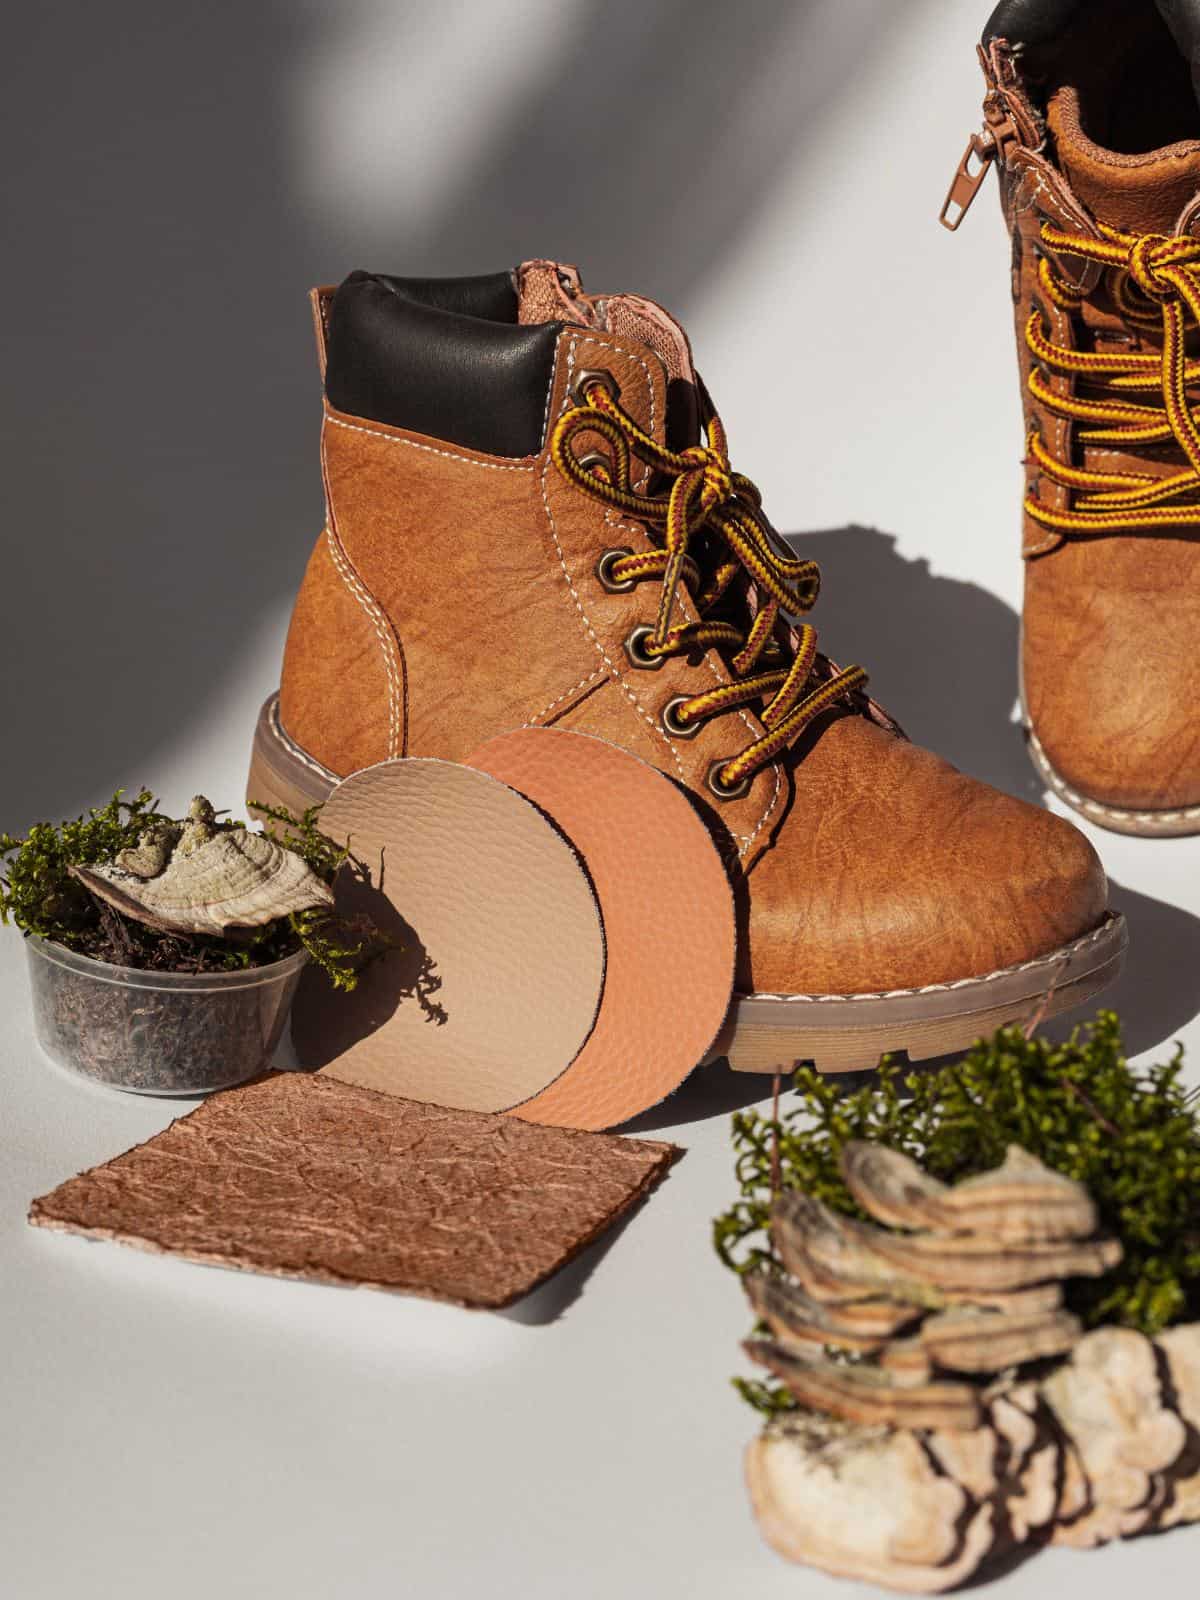 Eco-friendly sustainable boots made from mushroom leather materials. 